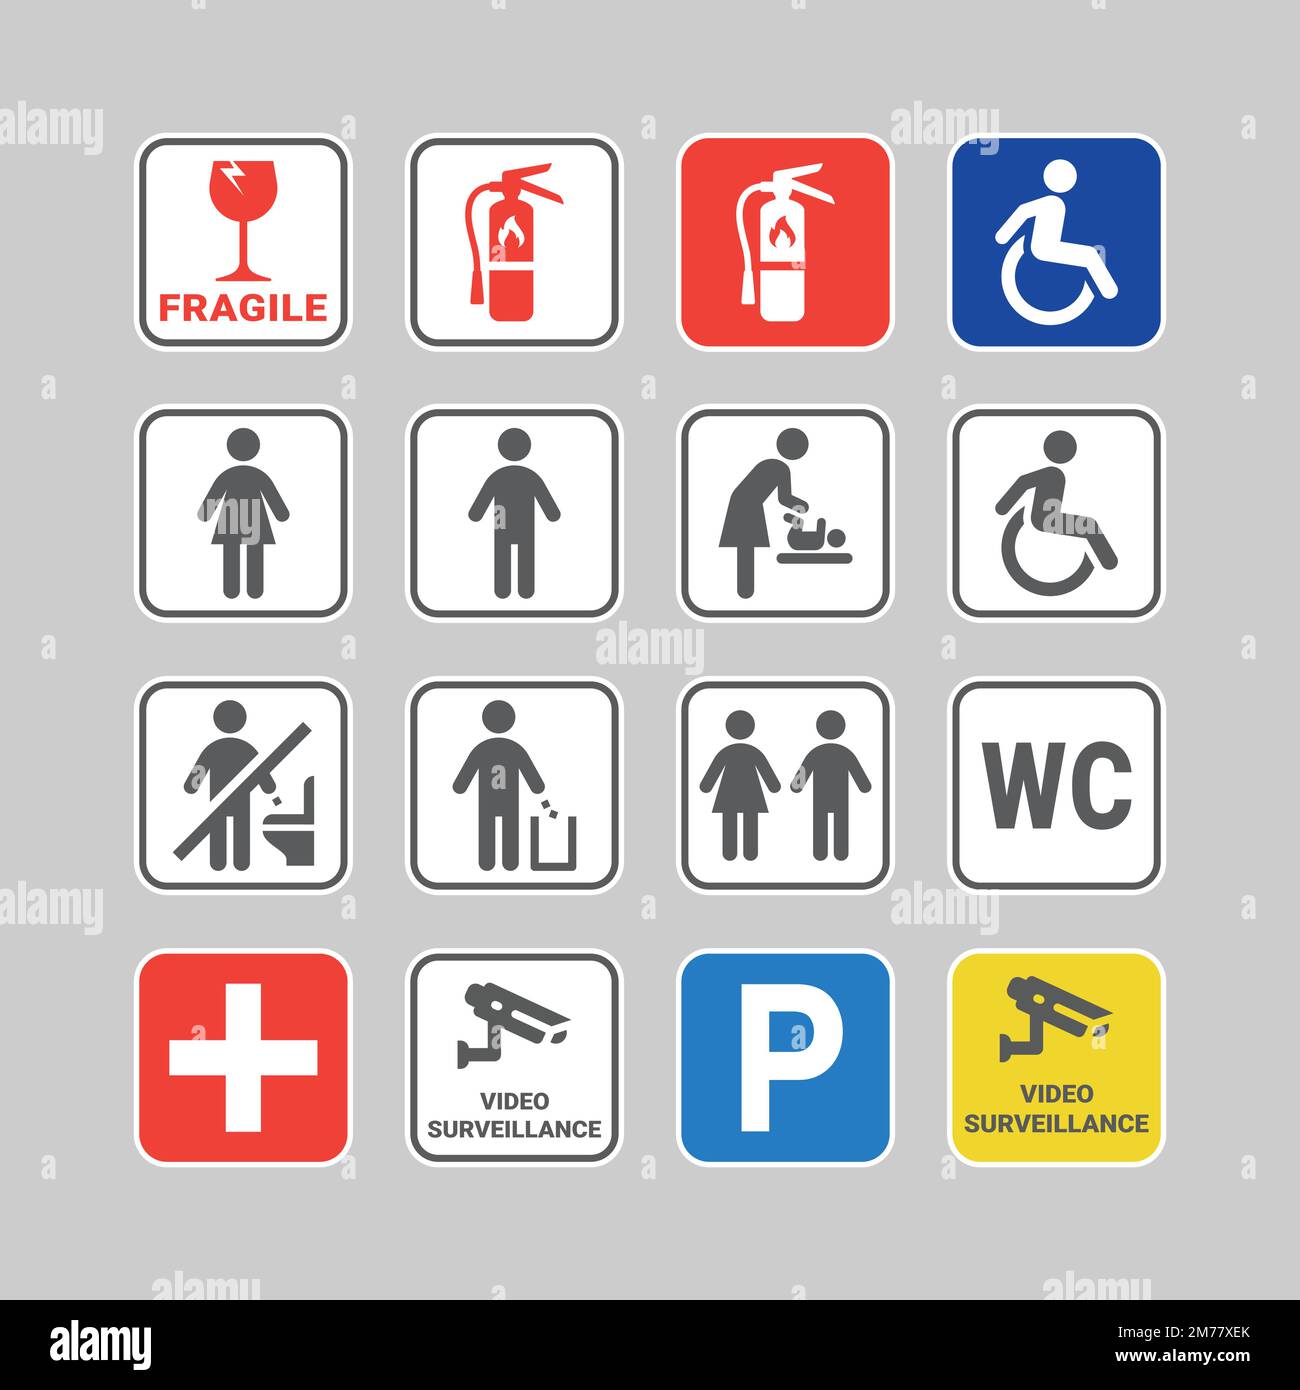 Wc, toilet and fire extinguisher colorful vector sticker and sign set. Public restroom, medical kit and parking stickers and signs. Stock Vector